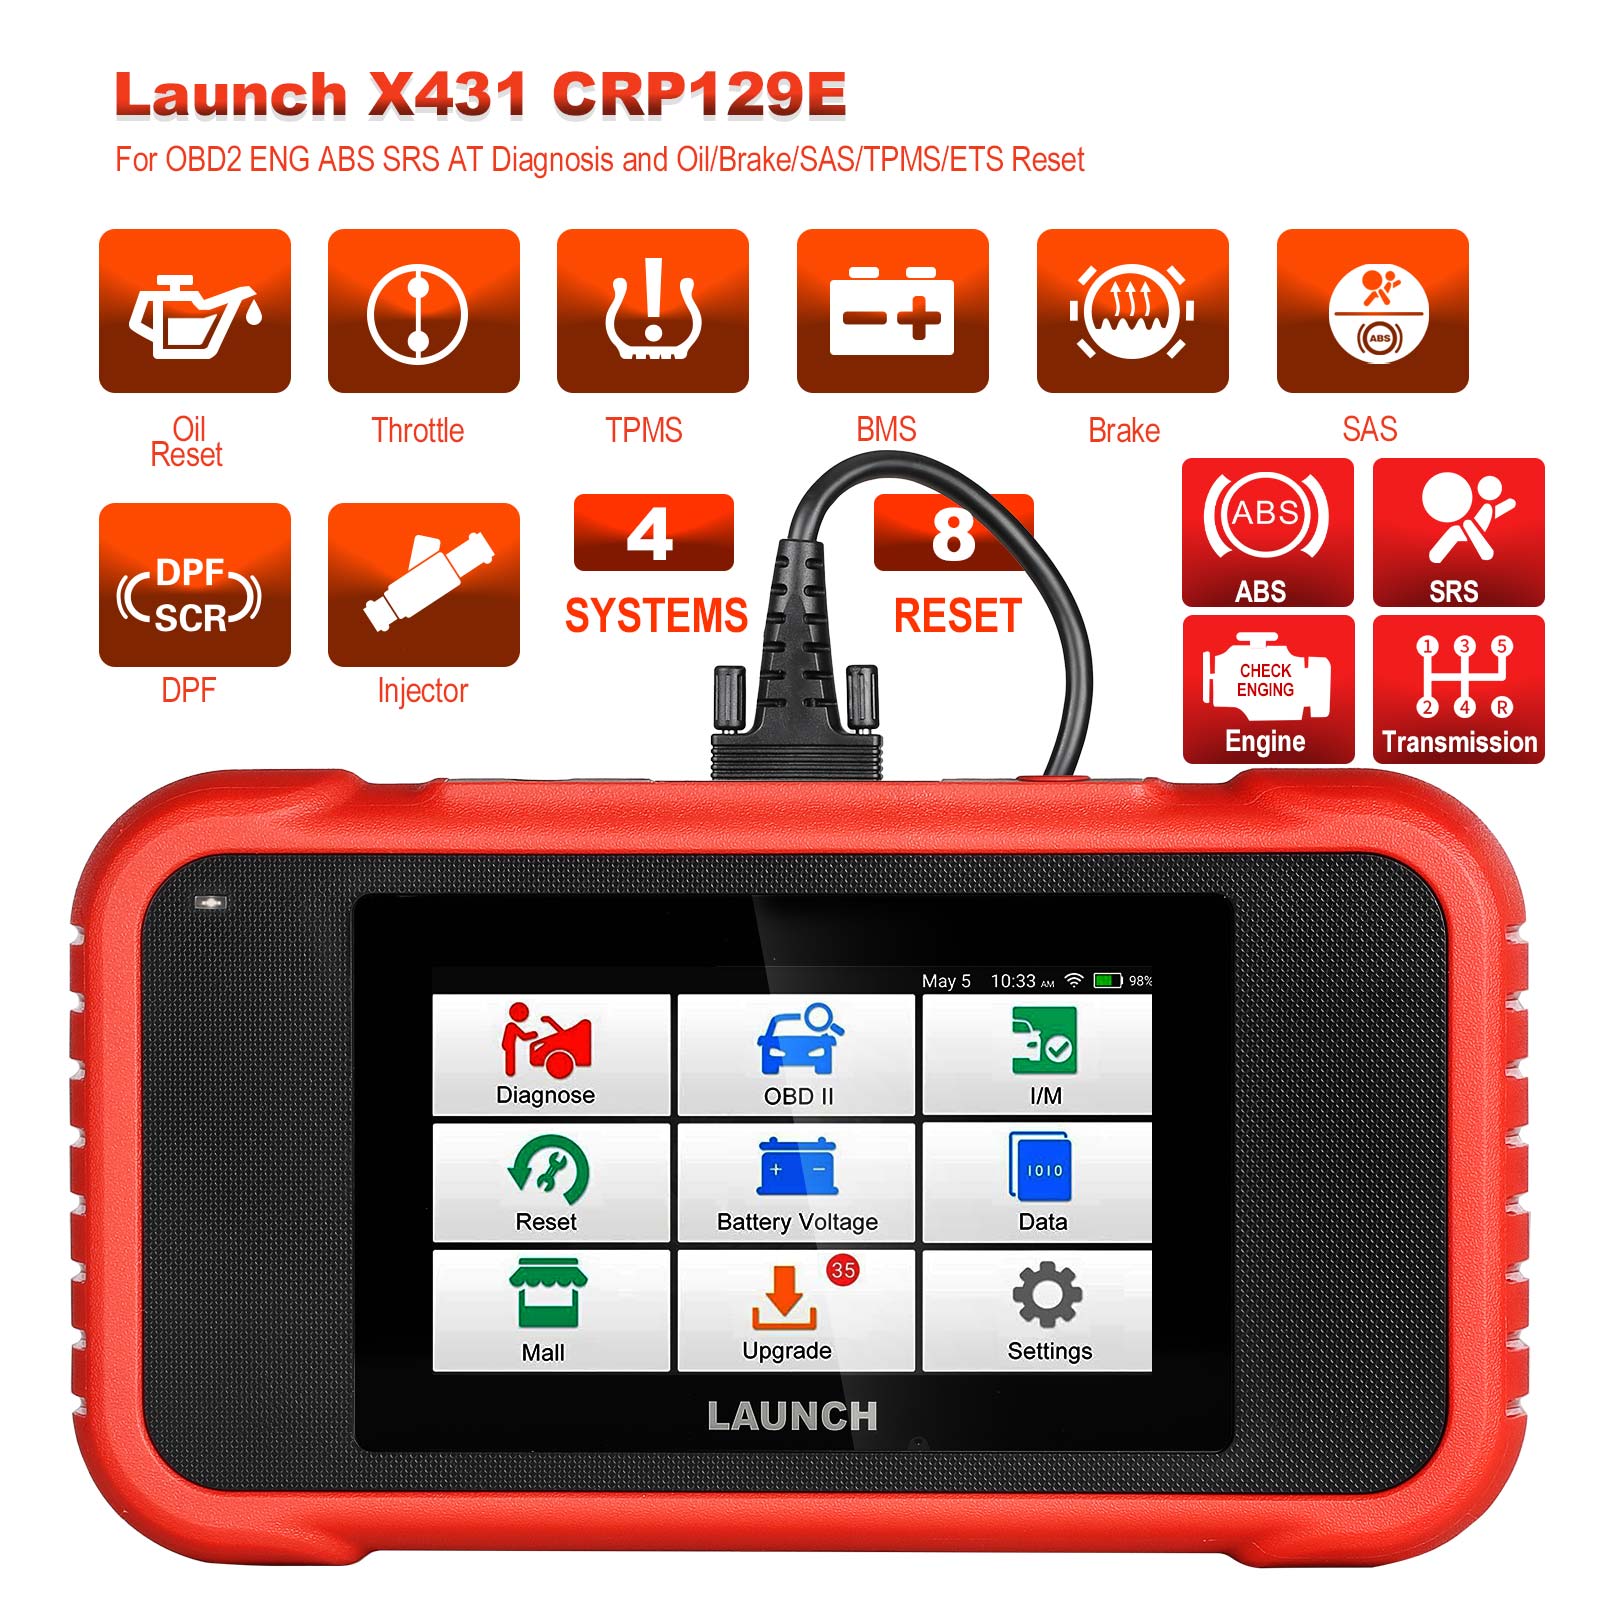 Launch X431 CRP129E 4 System OBD2 Scanner With 8 Reset Service